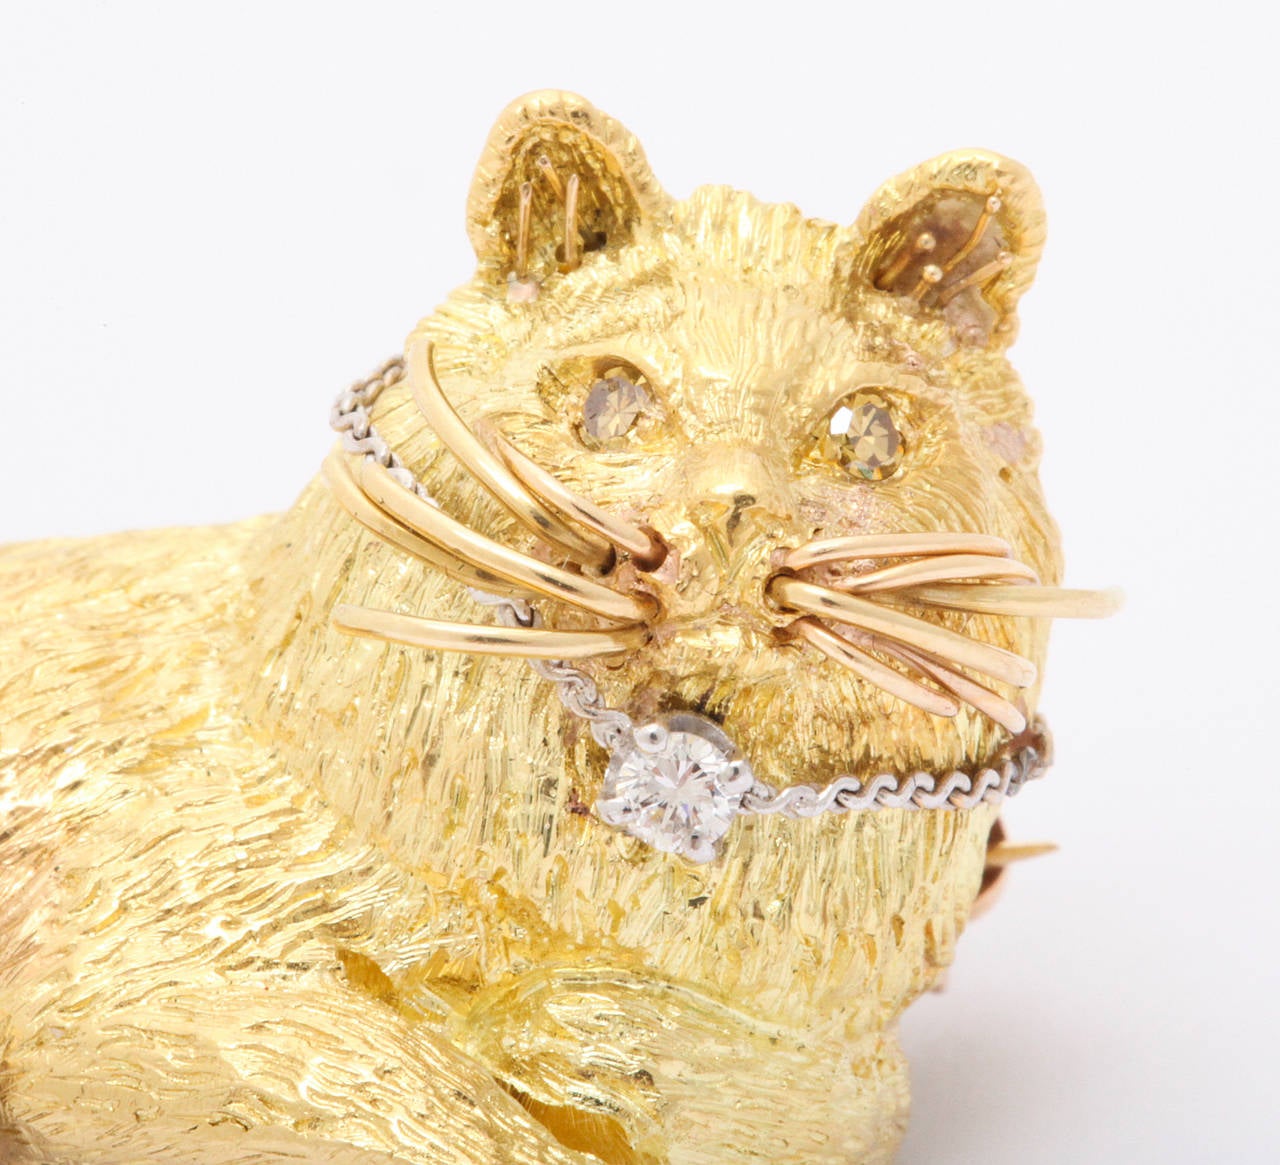 18k yellow gold cat brooch which can also be used as a pendant. This charming  and regal looking feline has yellow diamond eyes and a diamond on his collar. The piece is quite charming.